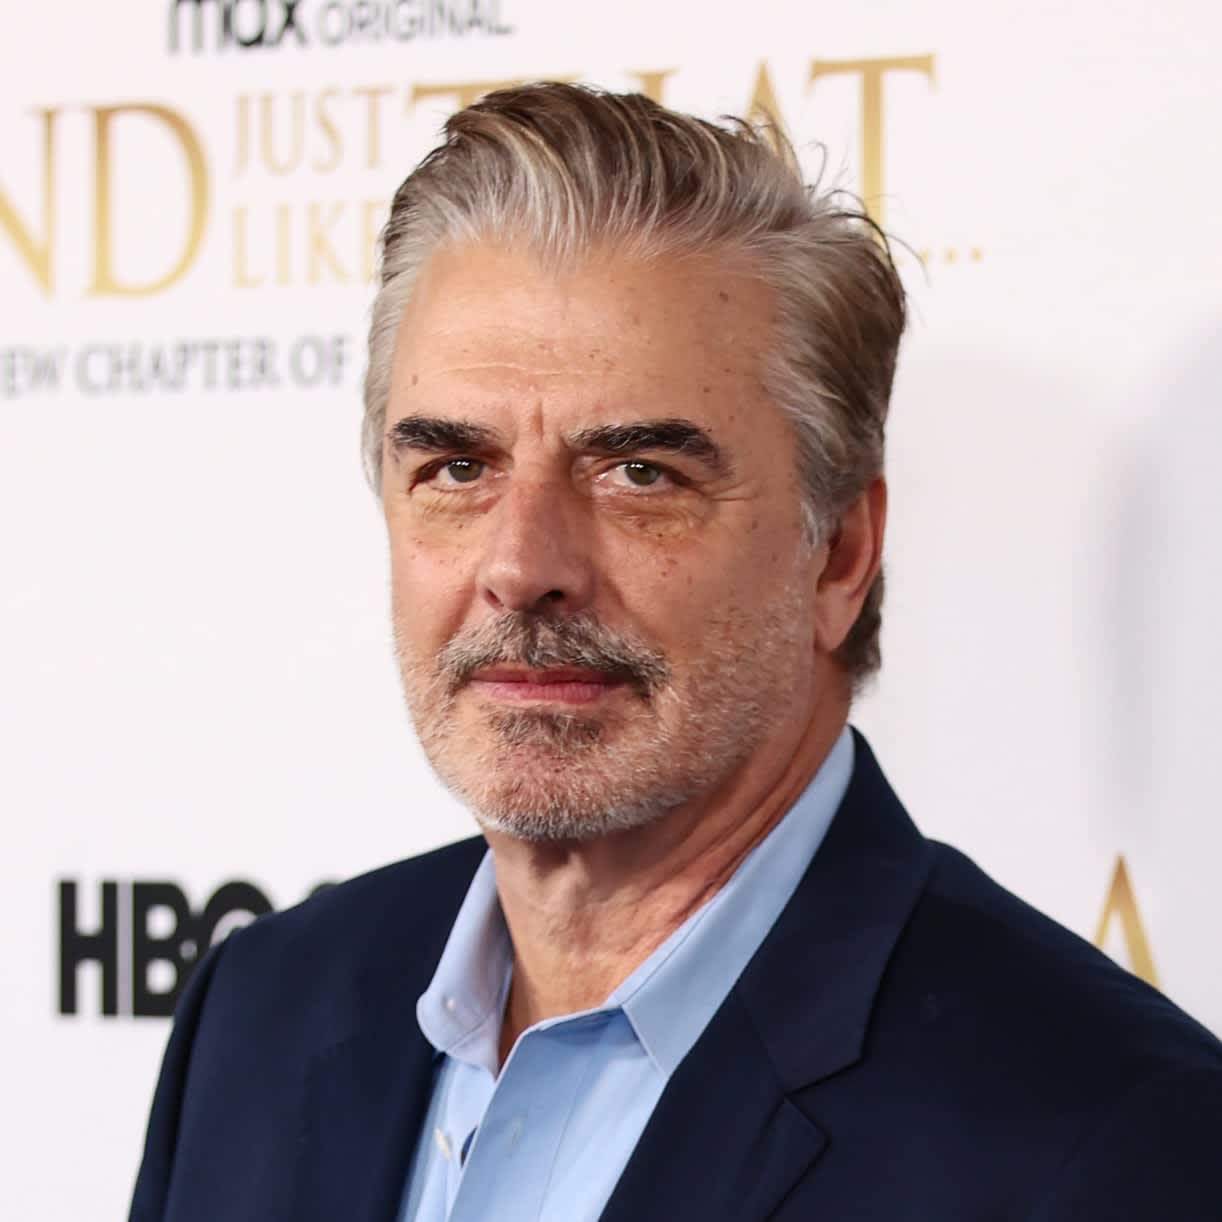 Sex And The City Star Chris Noth Has Been Accused Of Sexual Assault By 